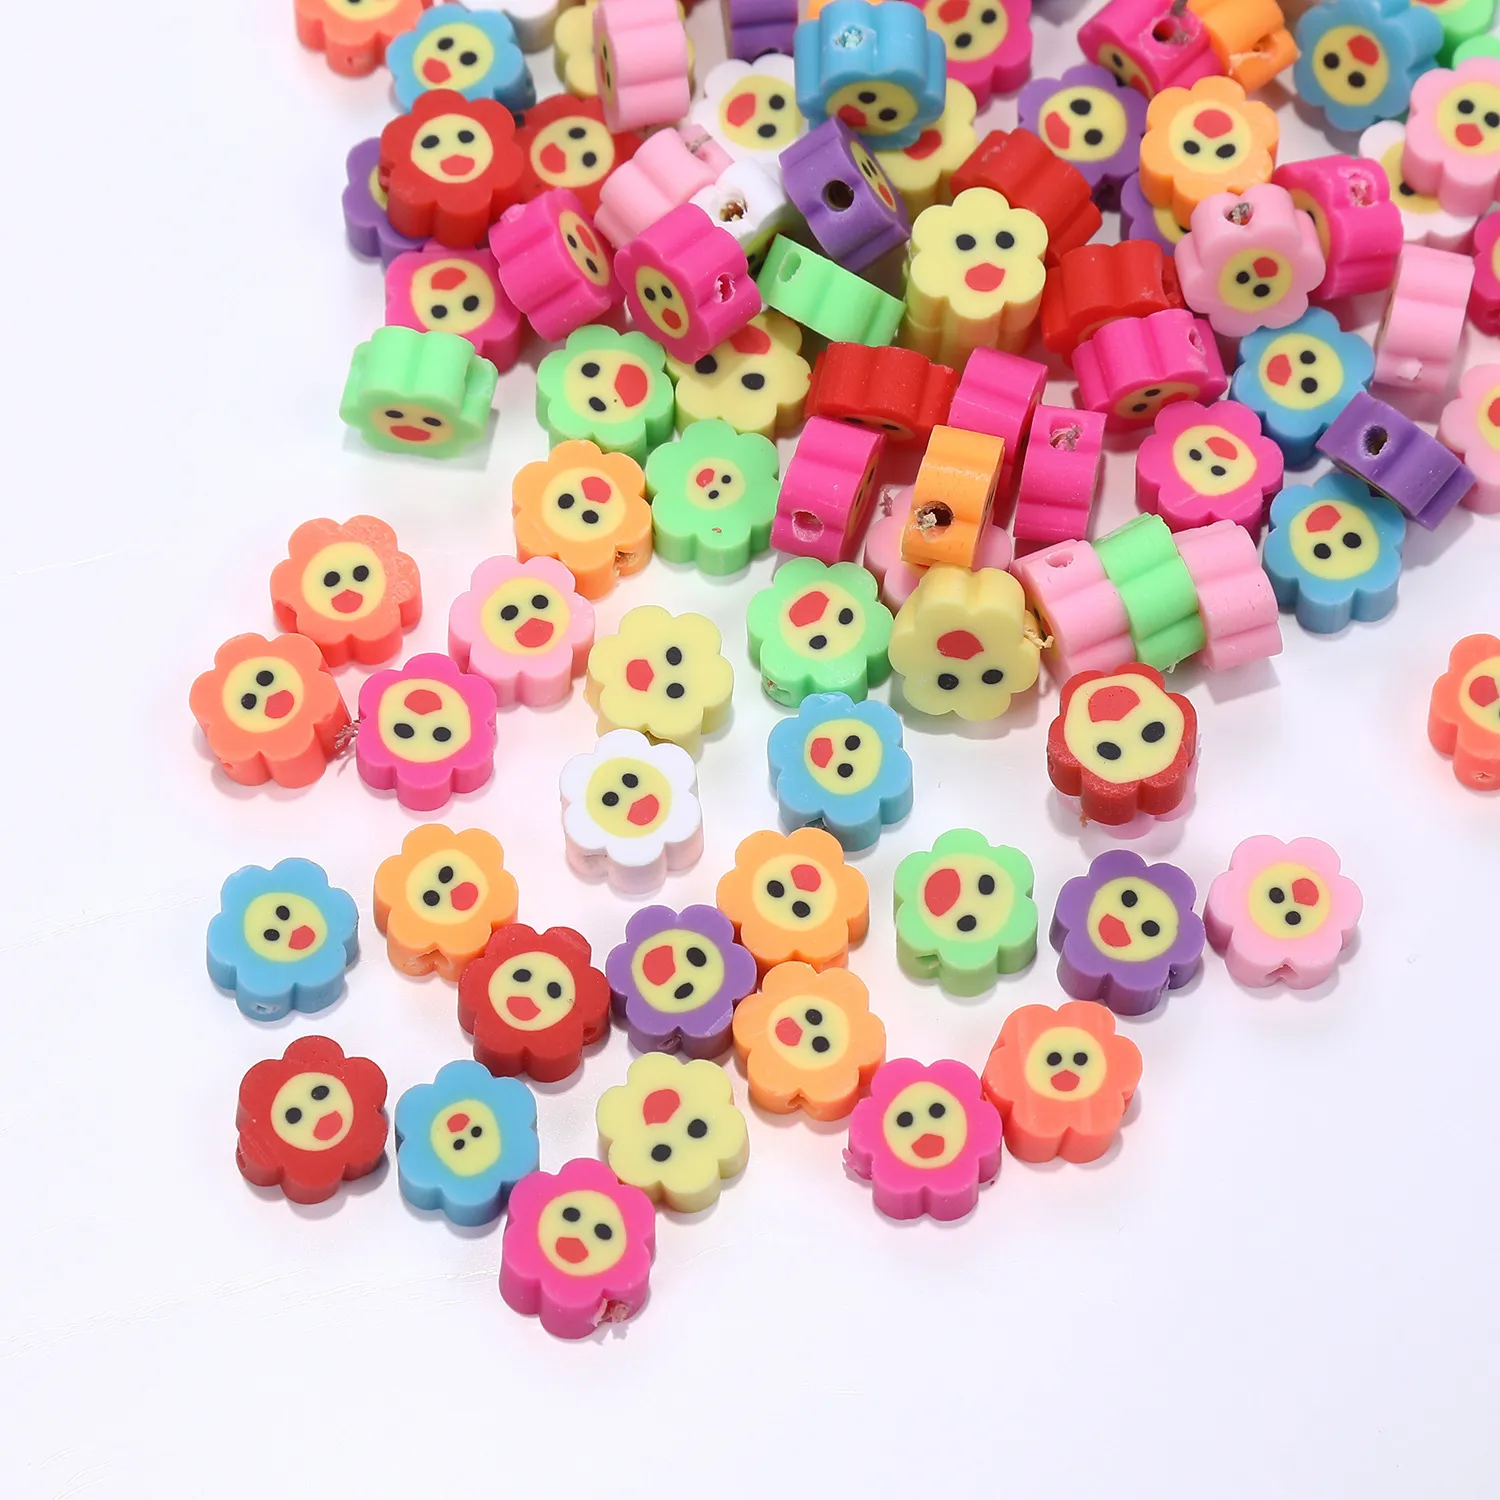 DIY Cute Clay Beads Beads For Jewelry Making Fruit, Flower, And Animal  Designs From Linry198900, $2.36